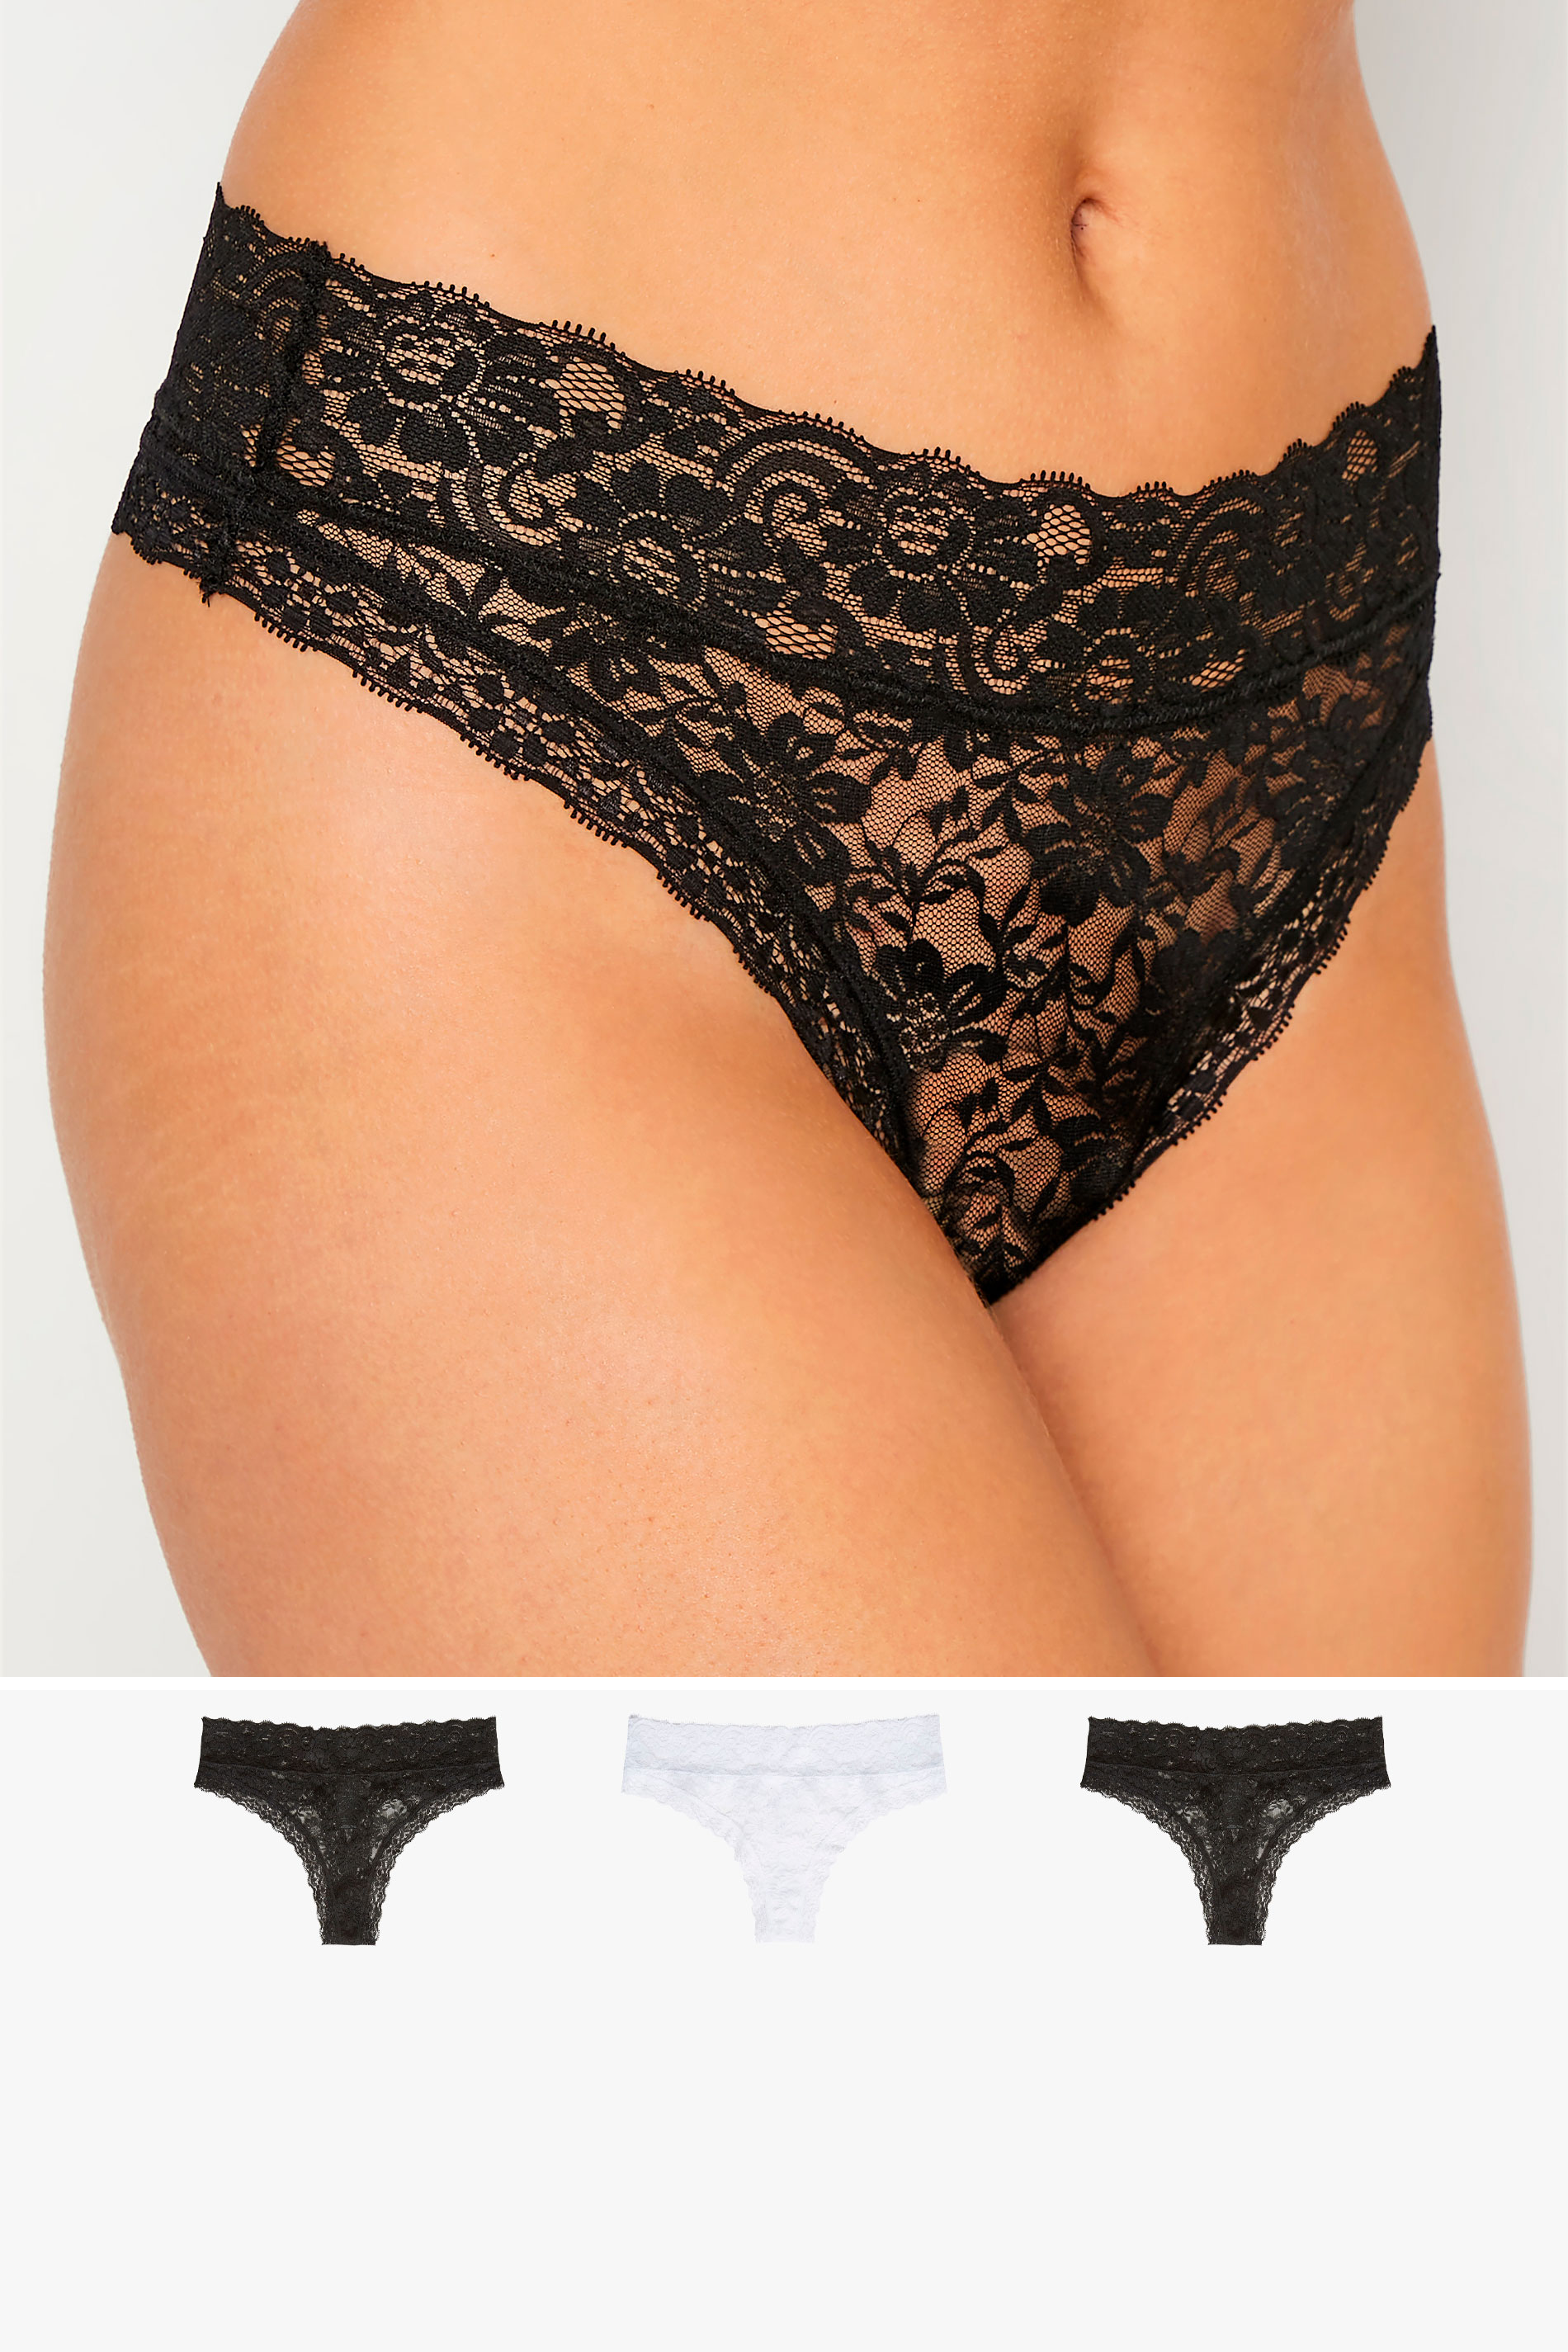 3 PACK Tall Black & White Floral Lace Thongs 1